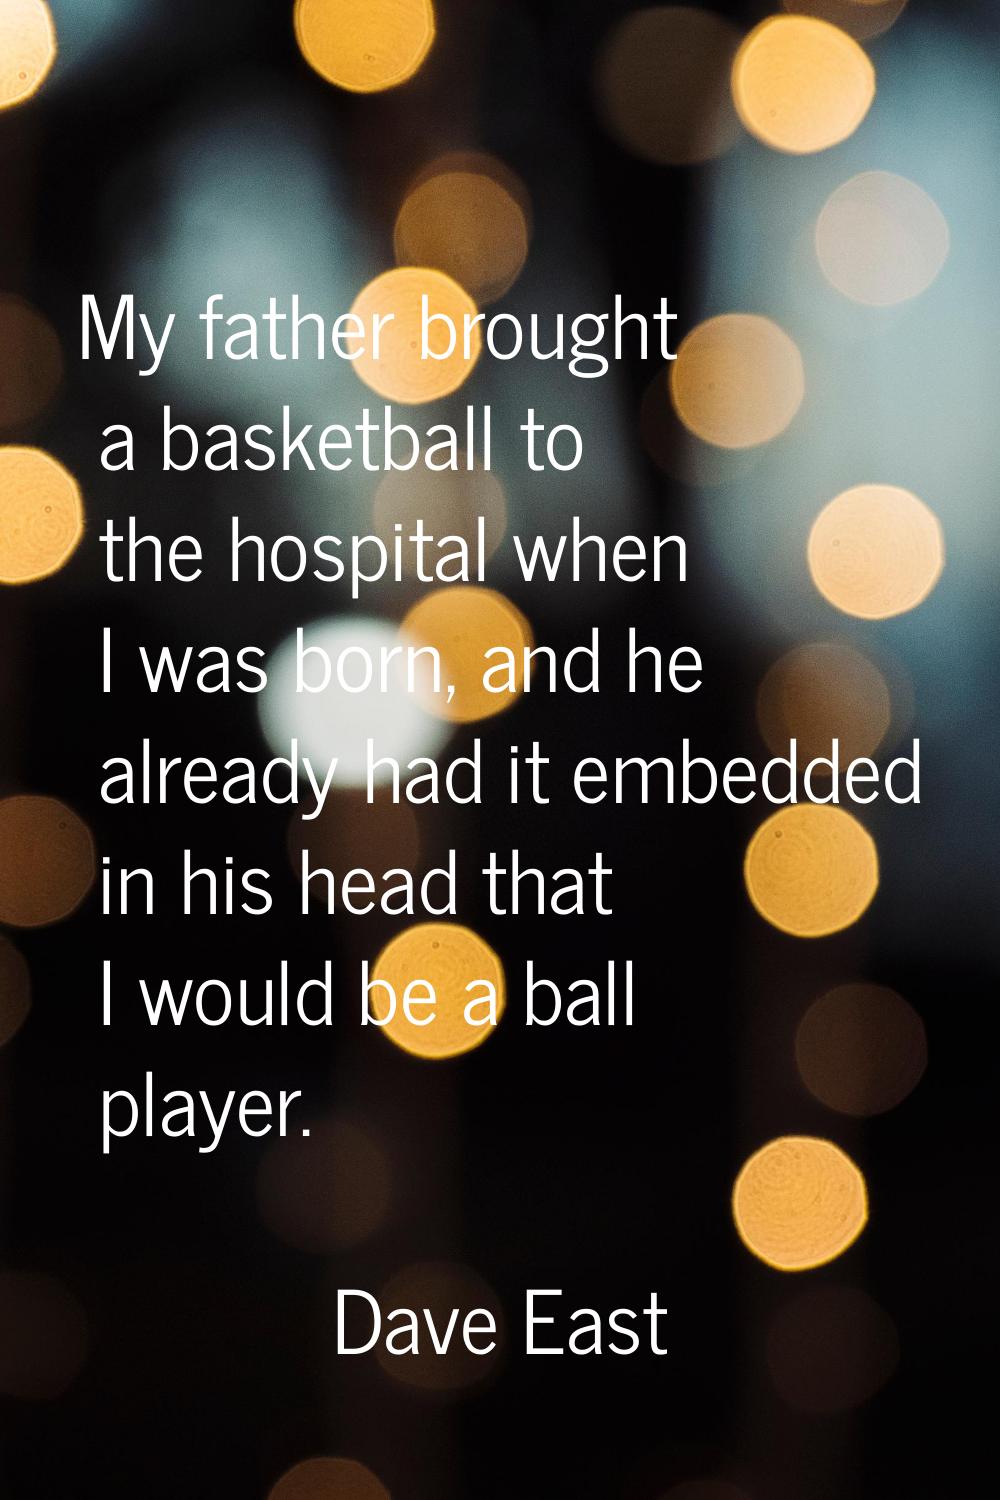 My father brought a basketball to the hospital when I was born, and he already had it embedded in h